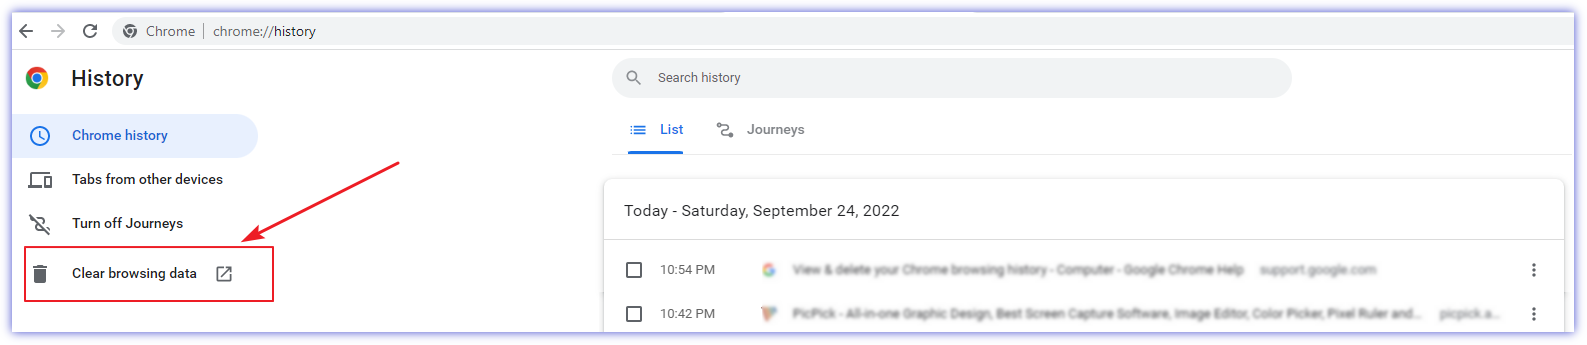 How to clear history on Chrome browser in Windows image 04